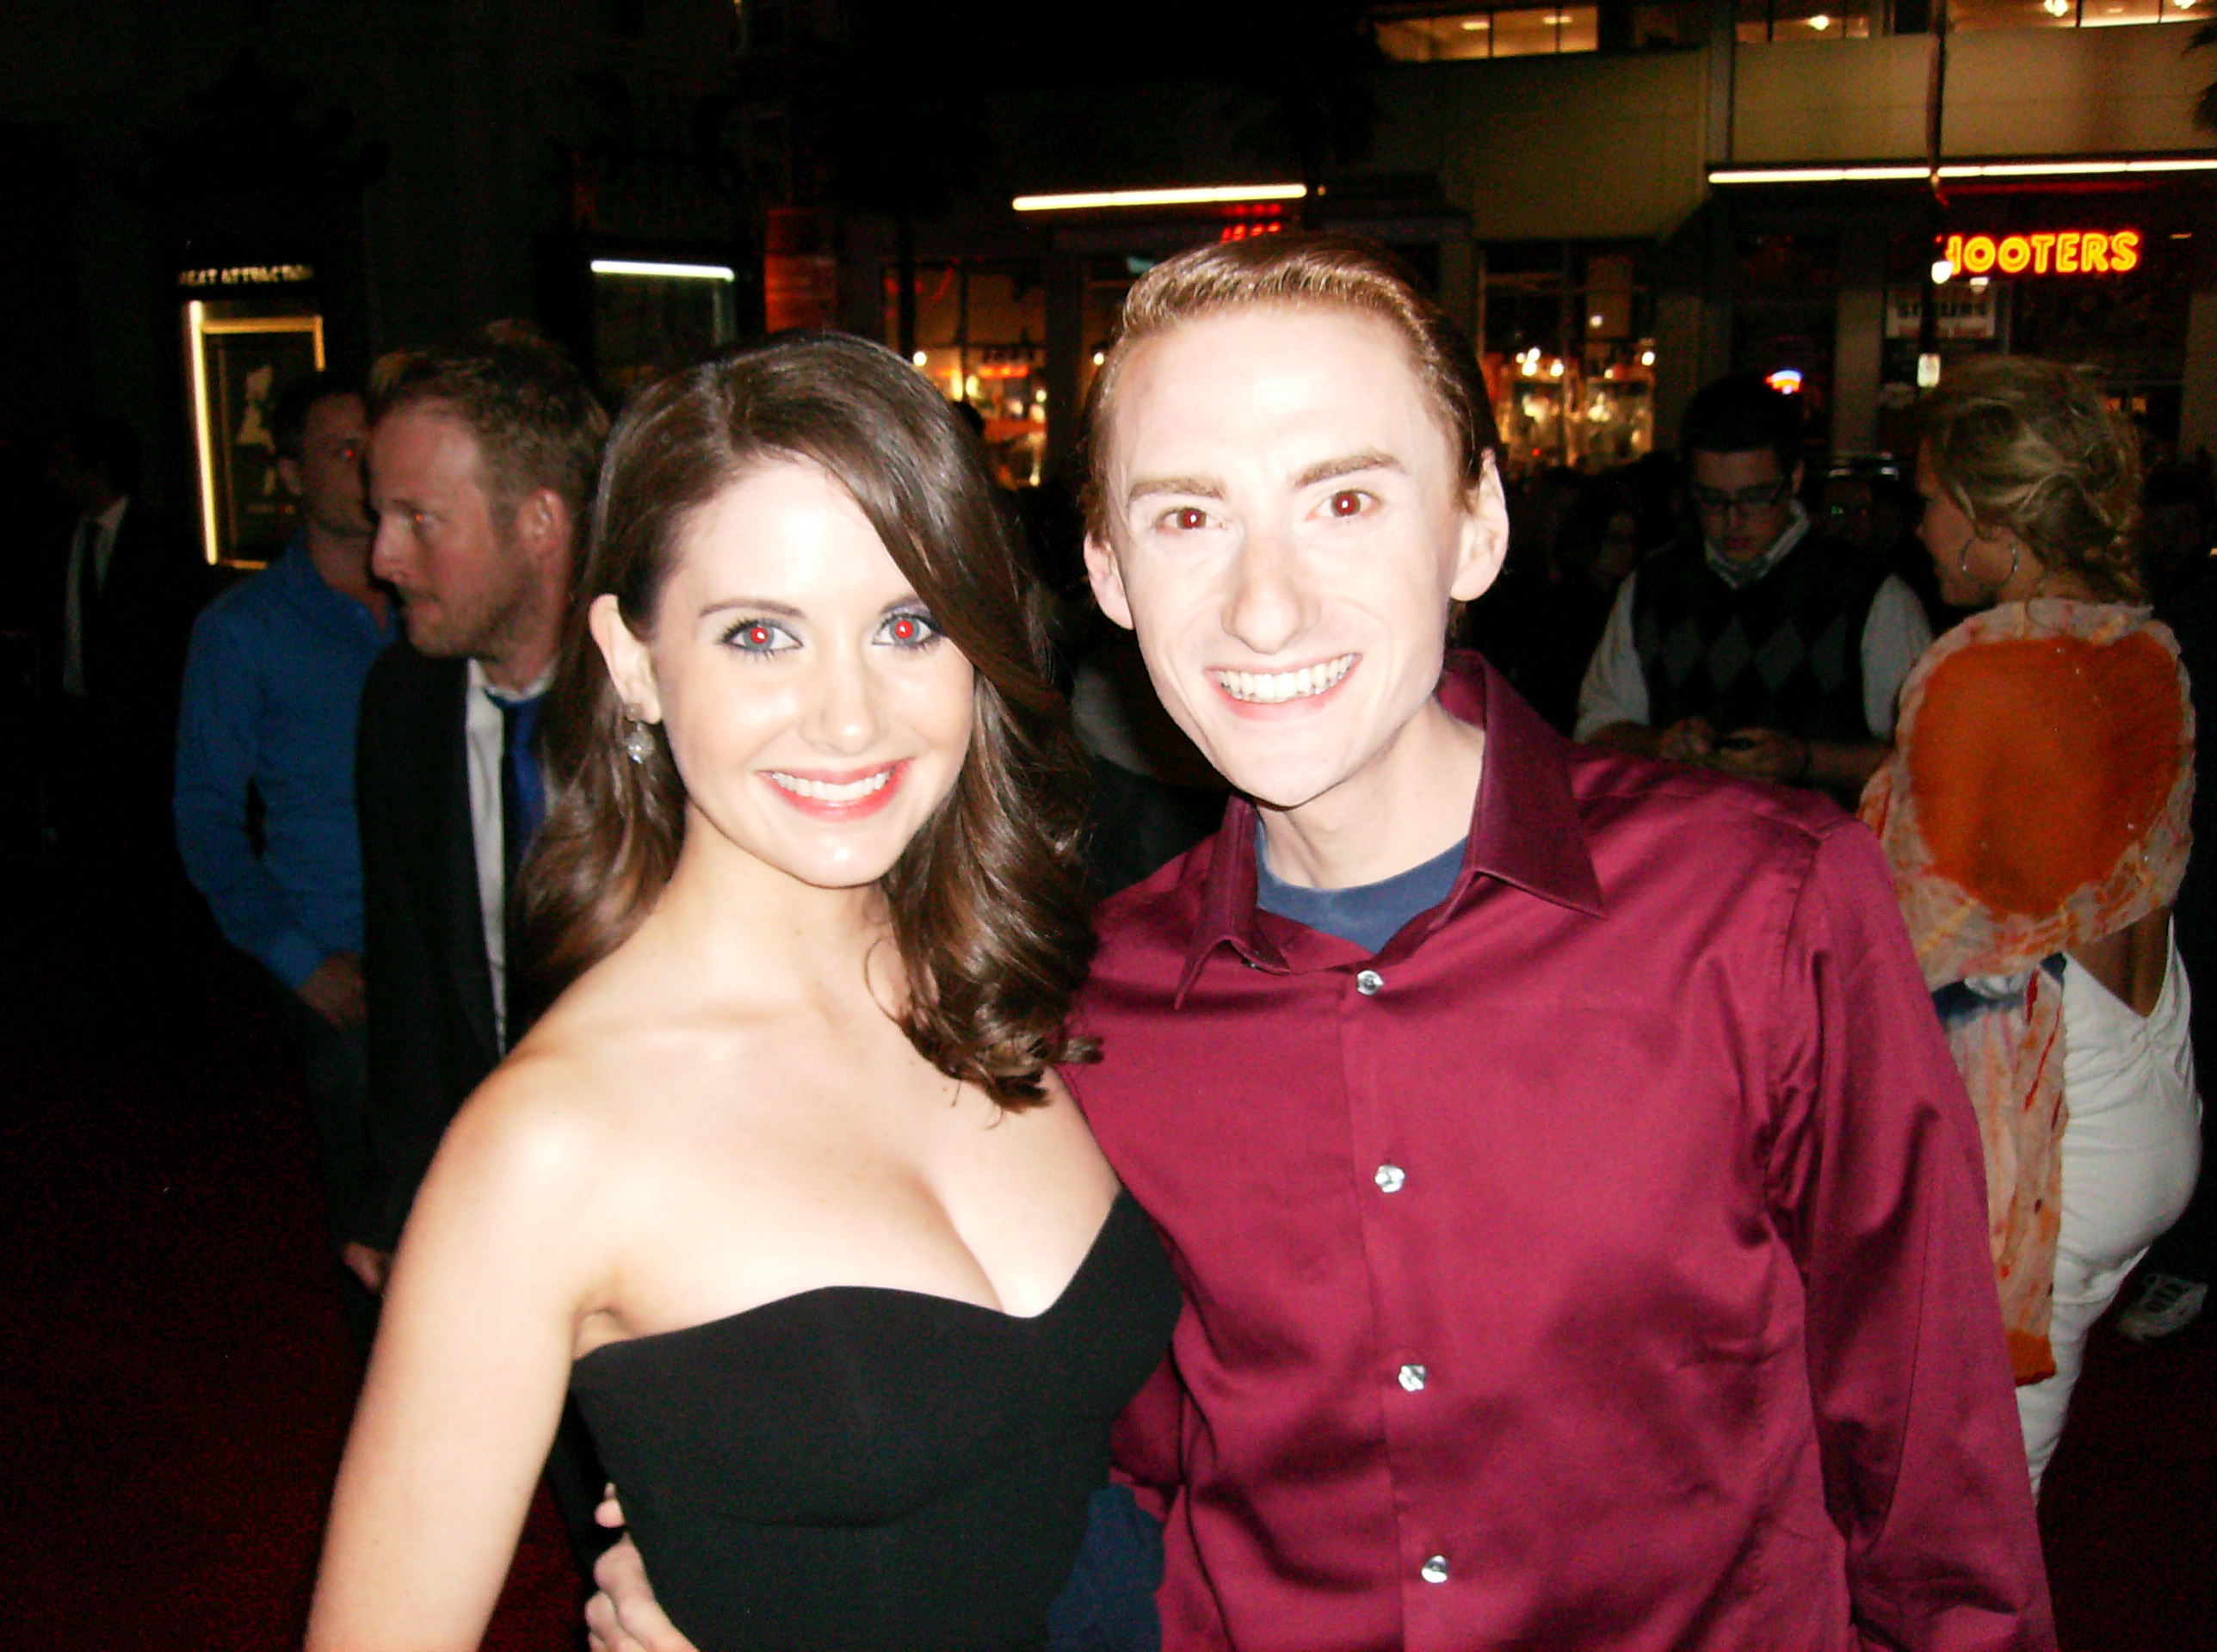 Joshua Patrick Dudley and Alison Brie at the Scream 4 Premiere in 2011